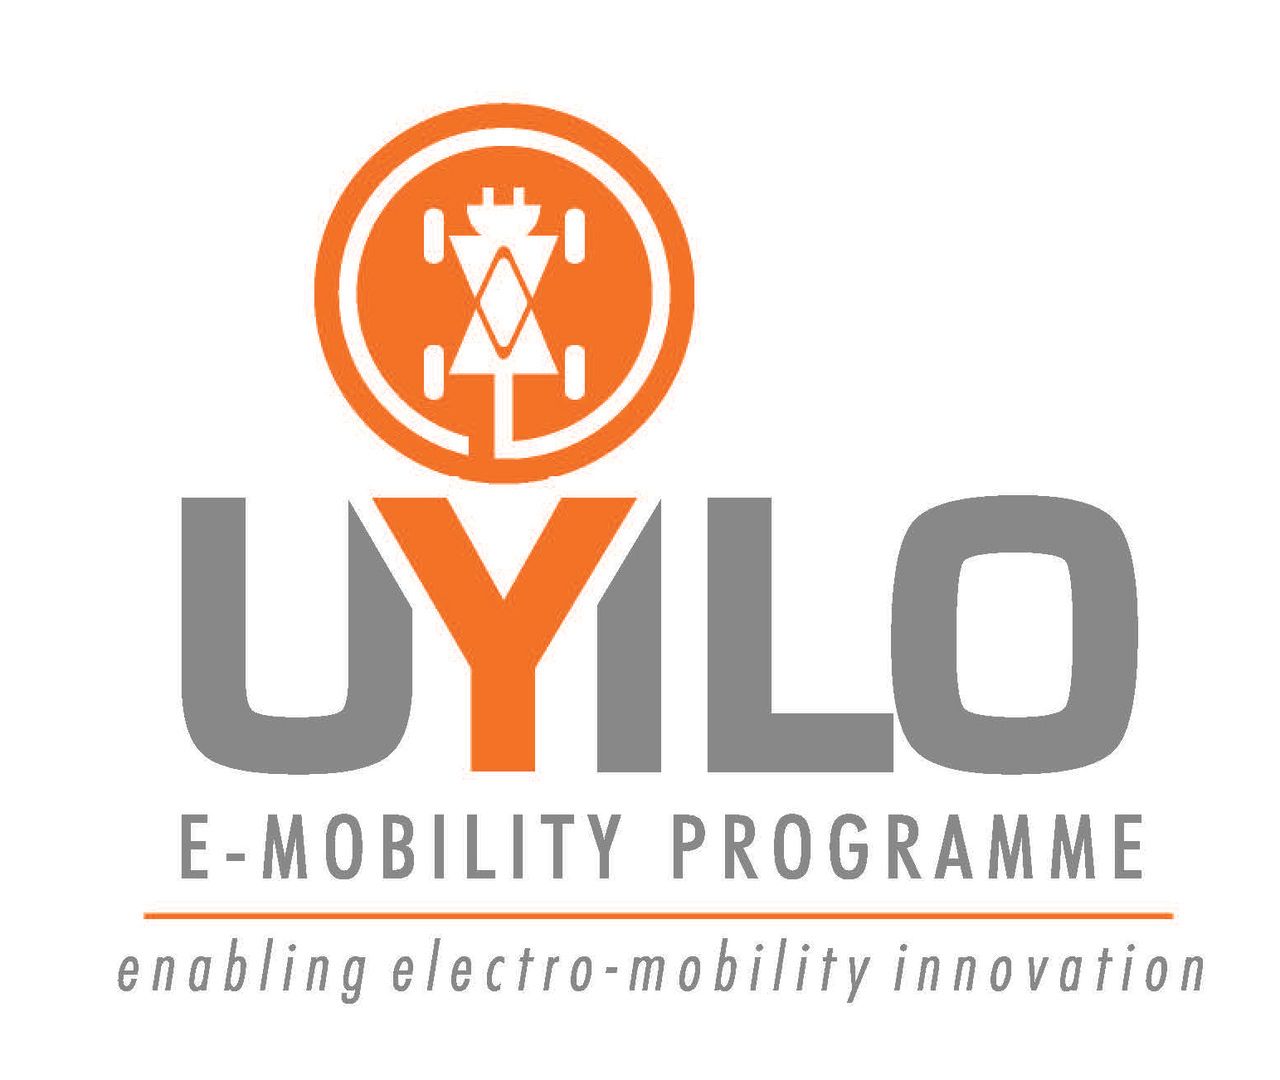 South Africa’s mobility startups can apply for funding from uYilo program